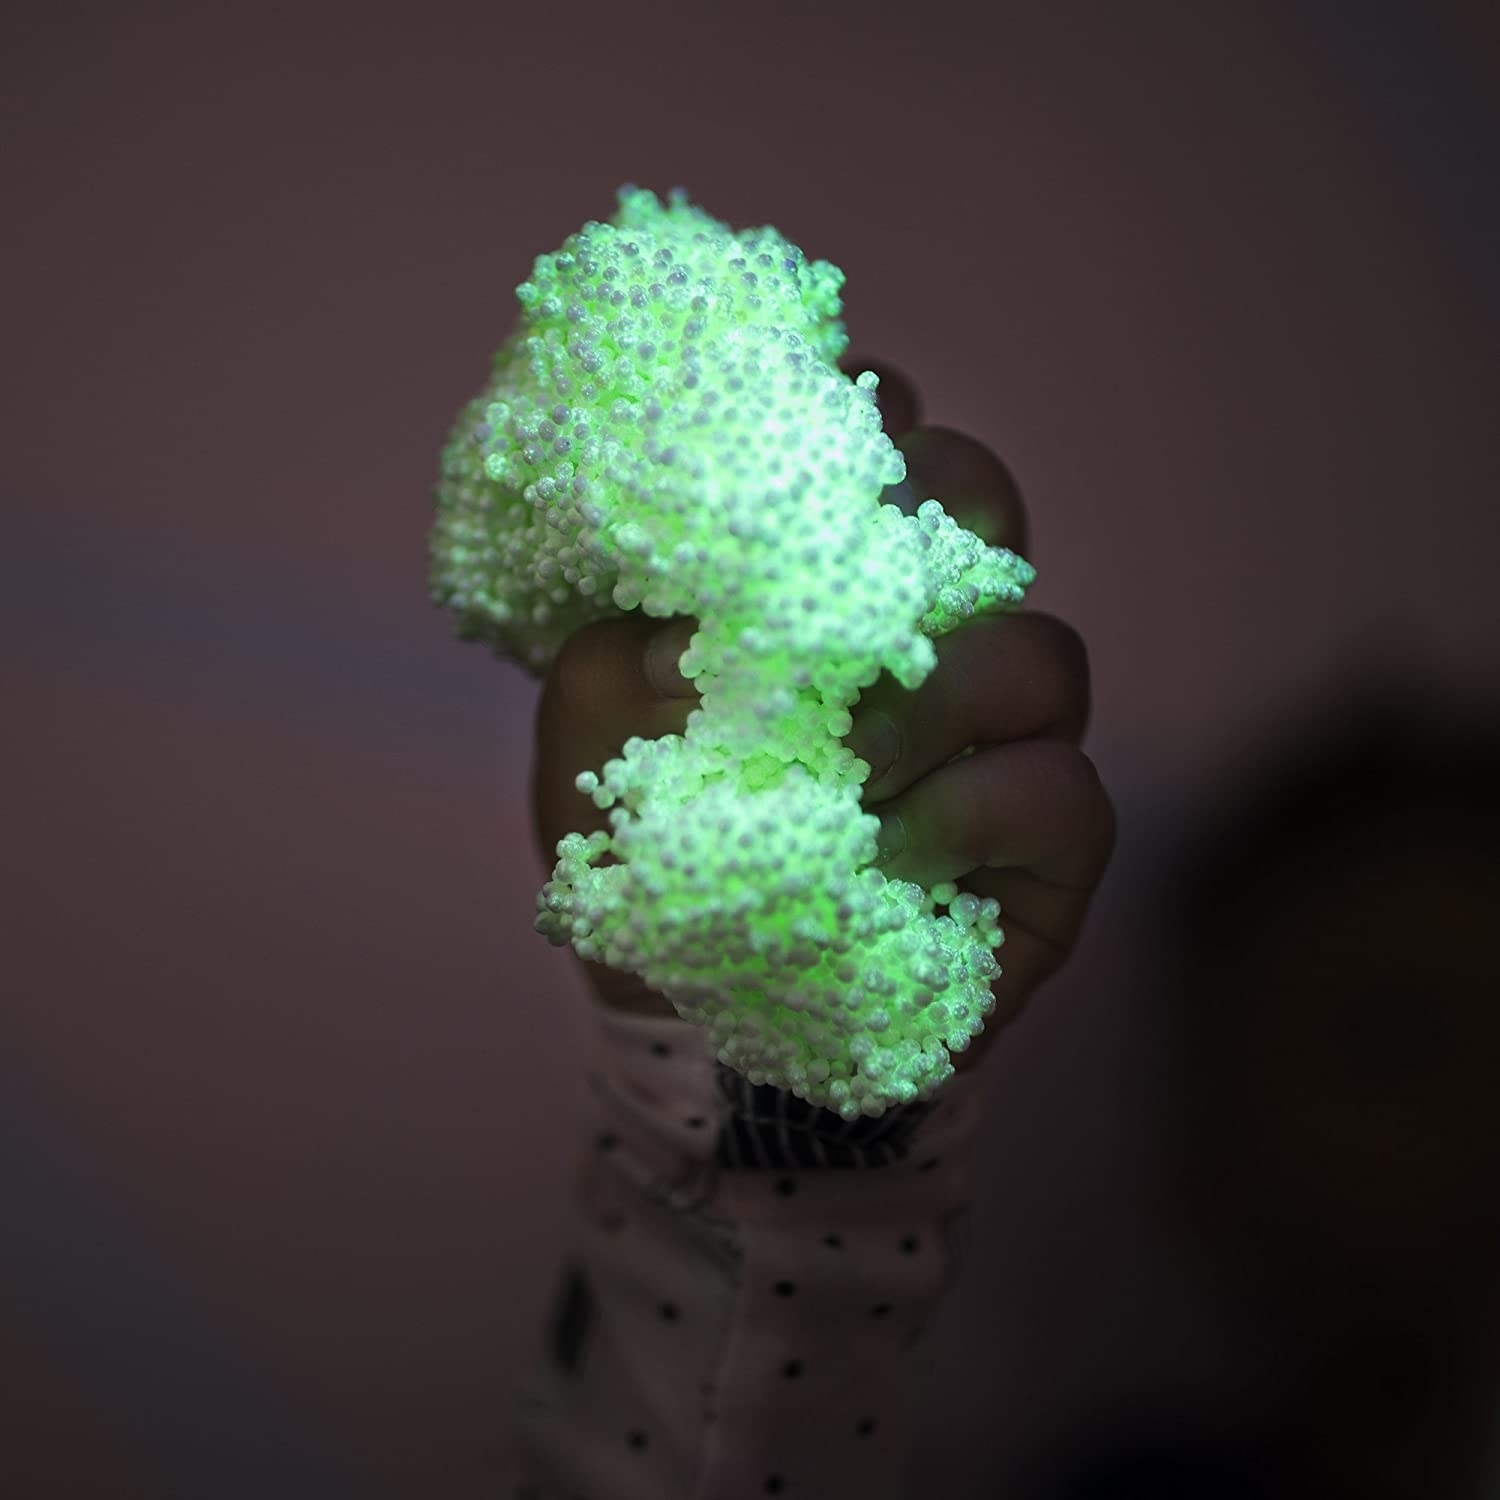 A person squishing the foam in their hand